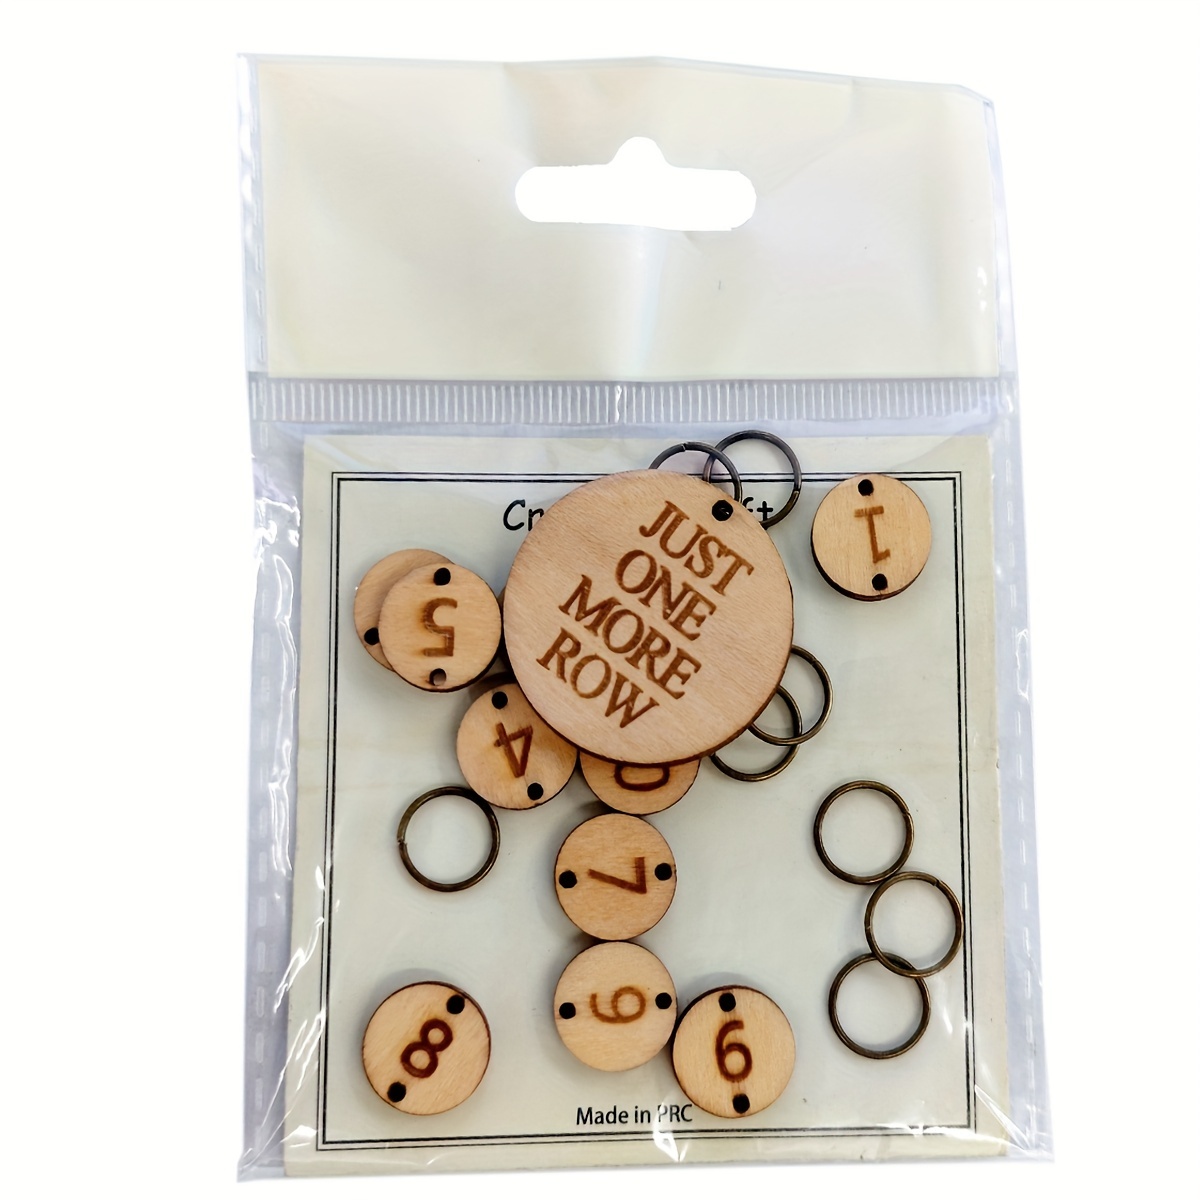 10pcs Wooden Stitch Markers Number 1~10, Crochet Stitch Marker Charms  Locking Stitch Marker With Iron Calabash Pins For Knitting Weaving Sewing  Access